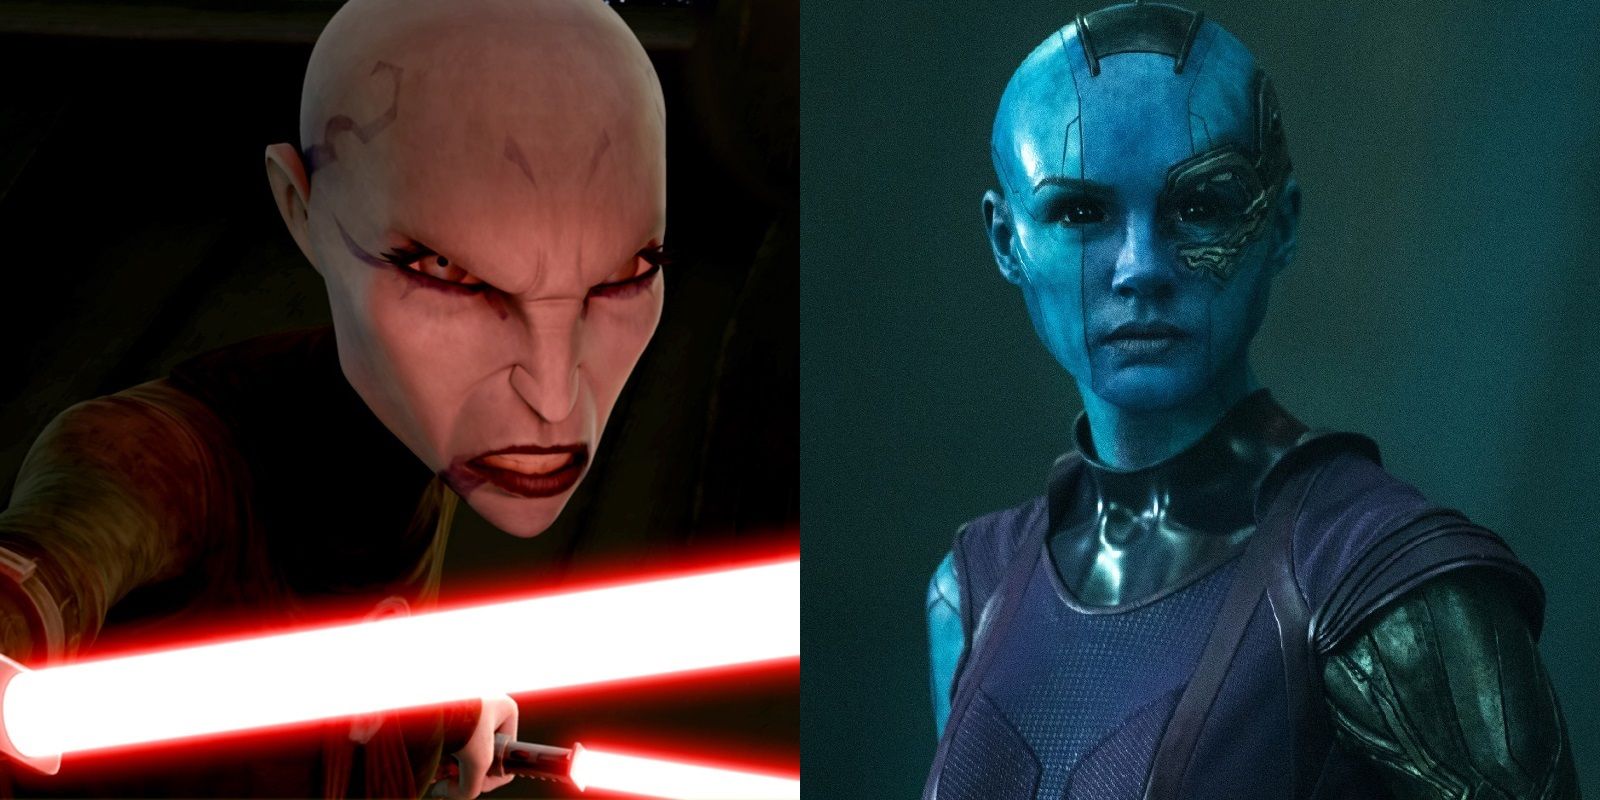 Asajj Ventress from The Clone Wars and Karen Gillan as Nebula in Guardians of the Galaxy